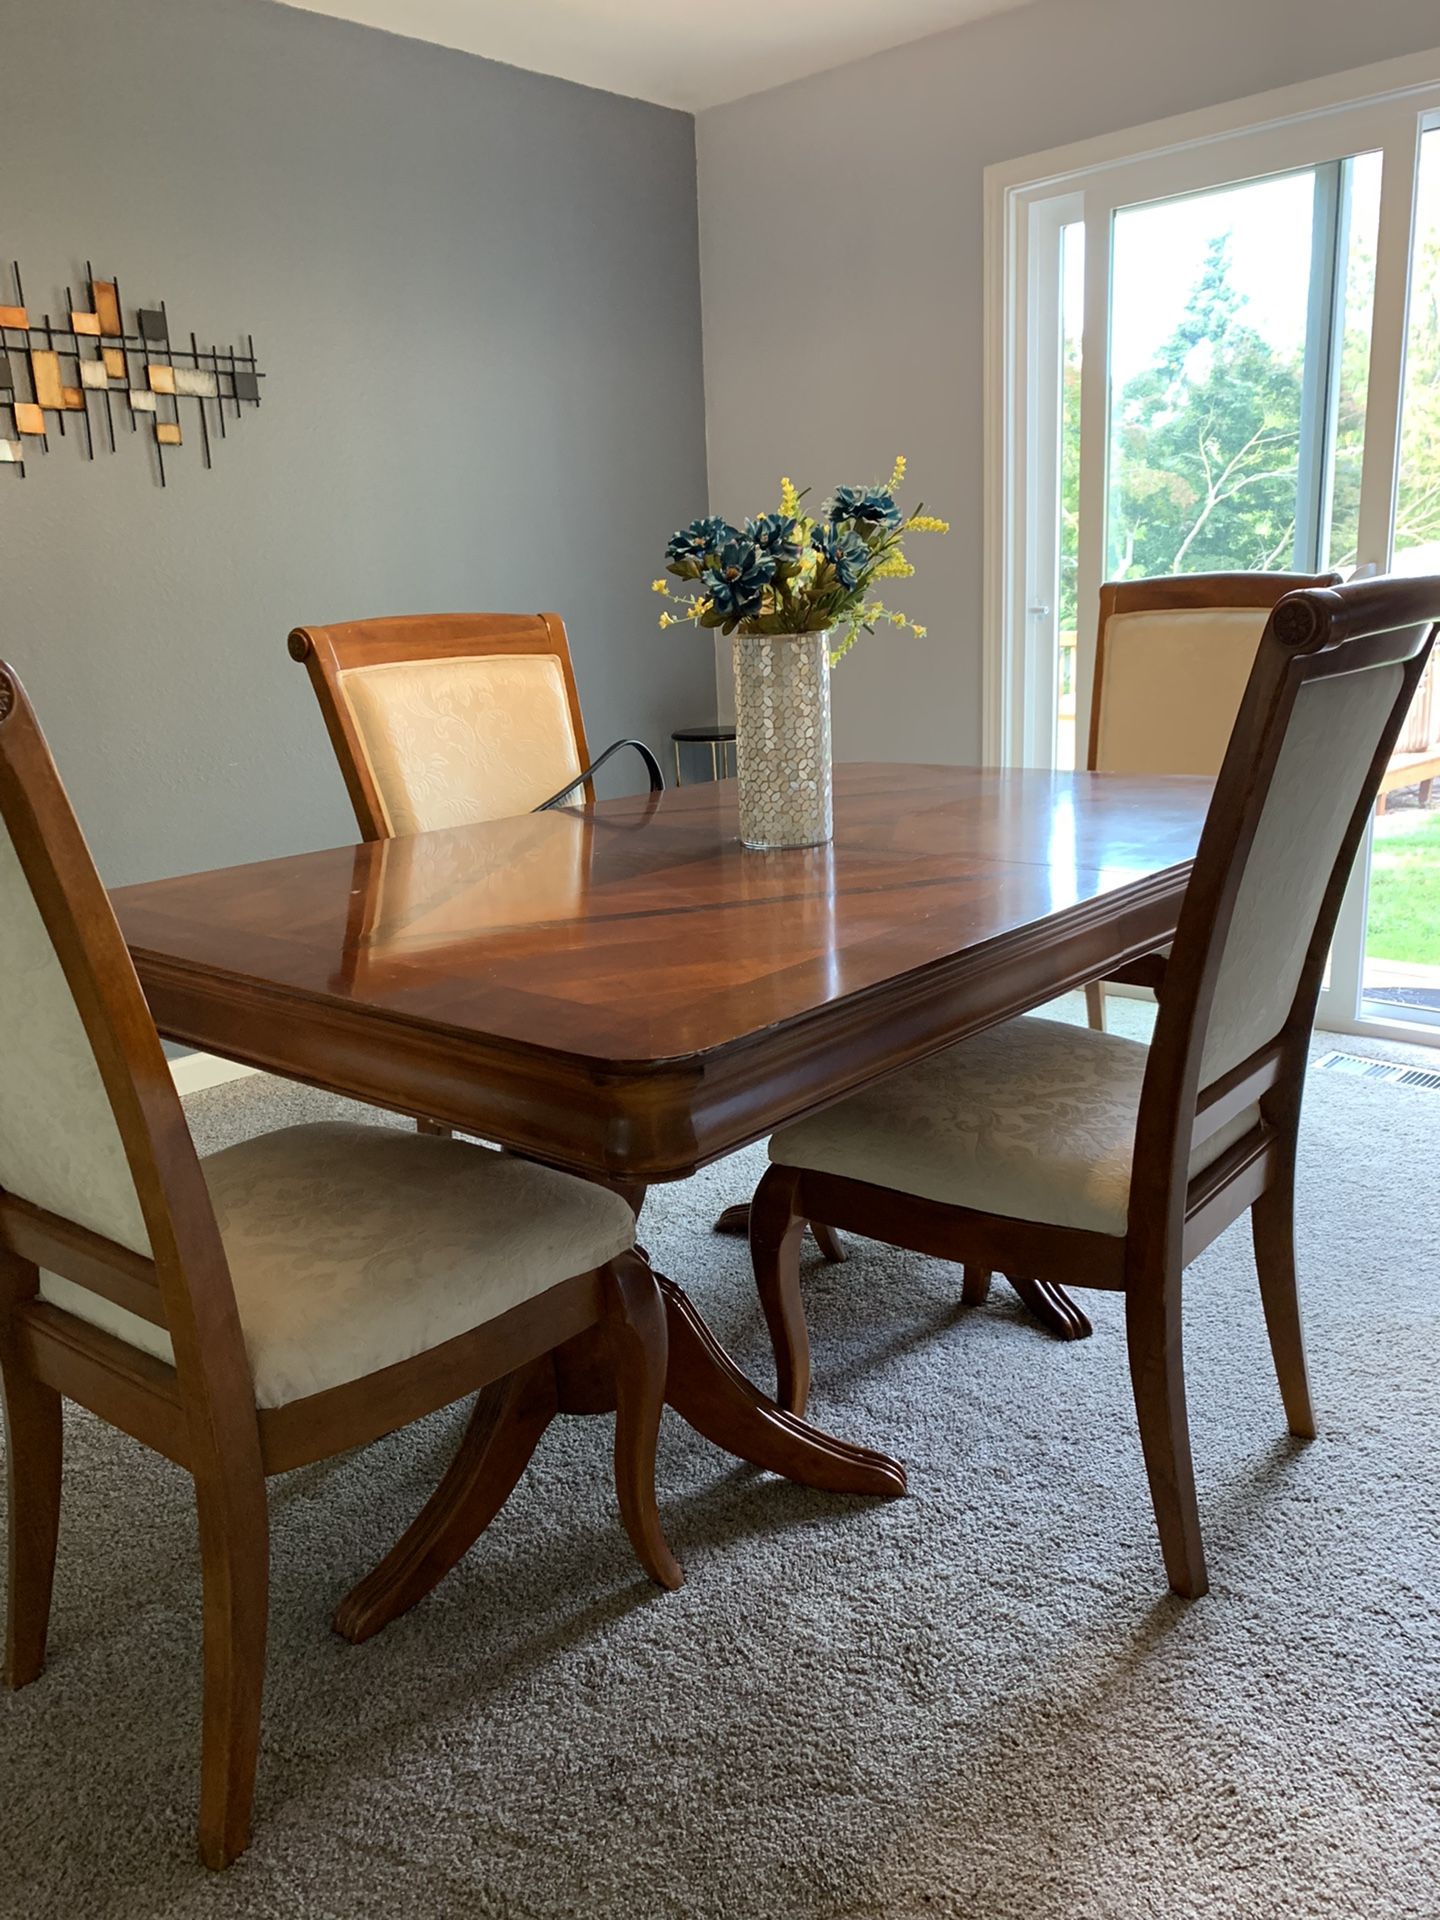 Dining Table With 6 Chairs $80.00 Must Go Asap 